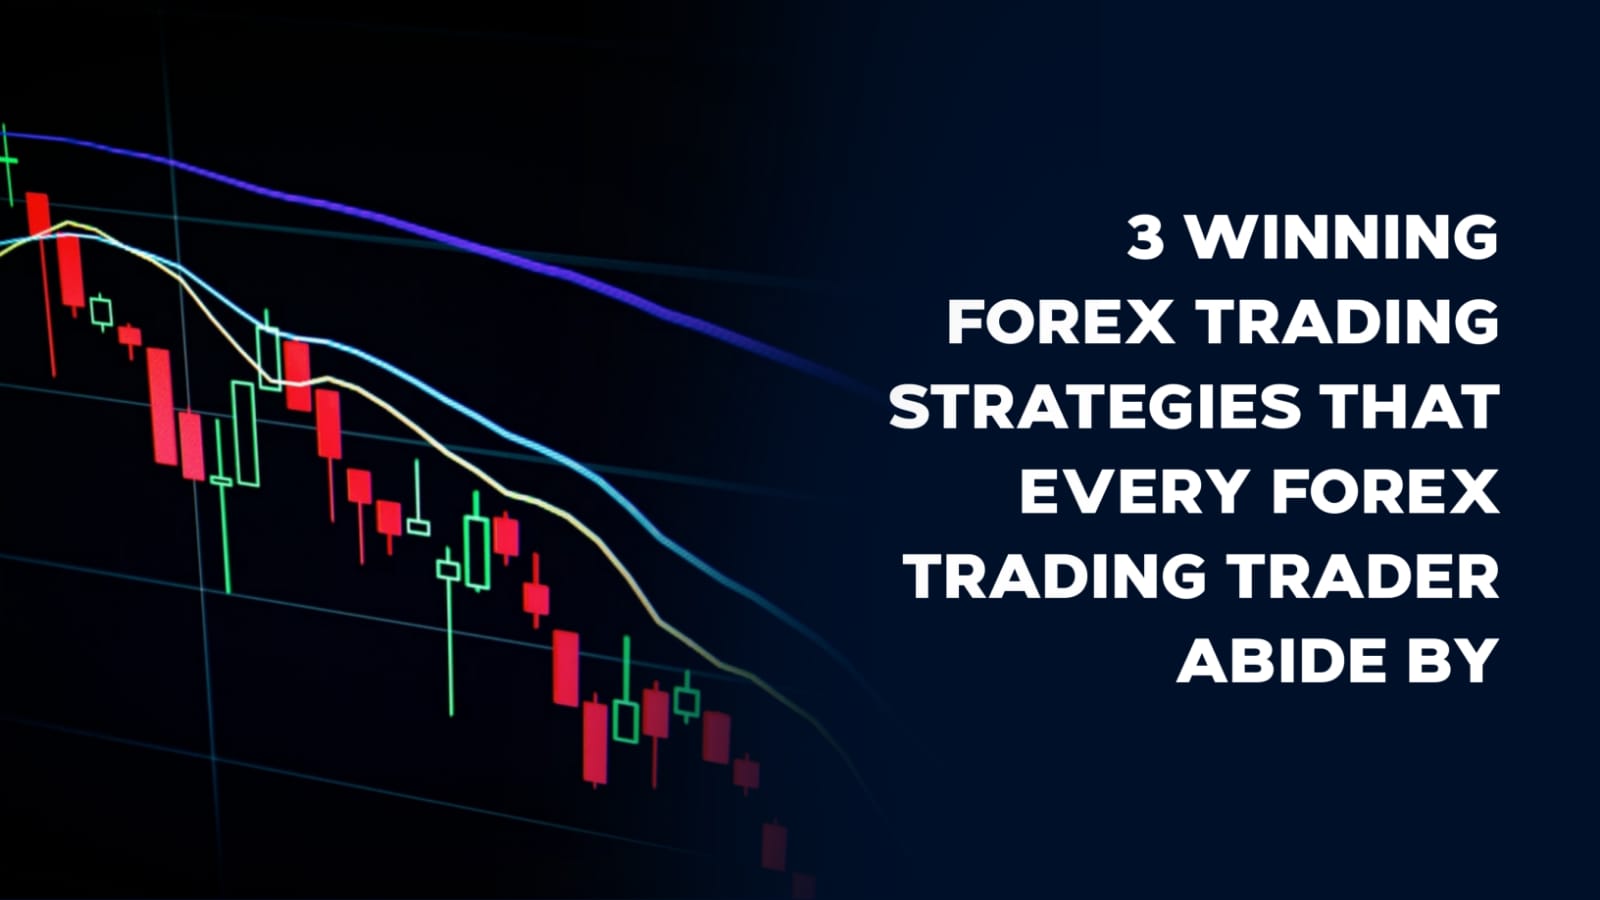 3 Winning Forex Trading Strategies That Every Forex Trading Trader Abide By